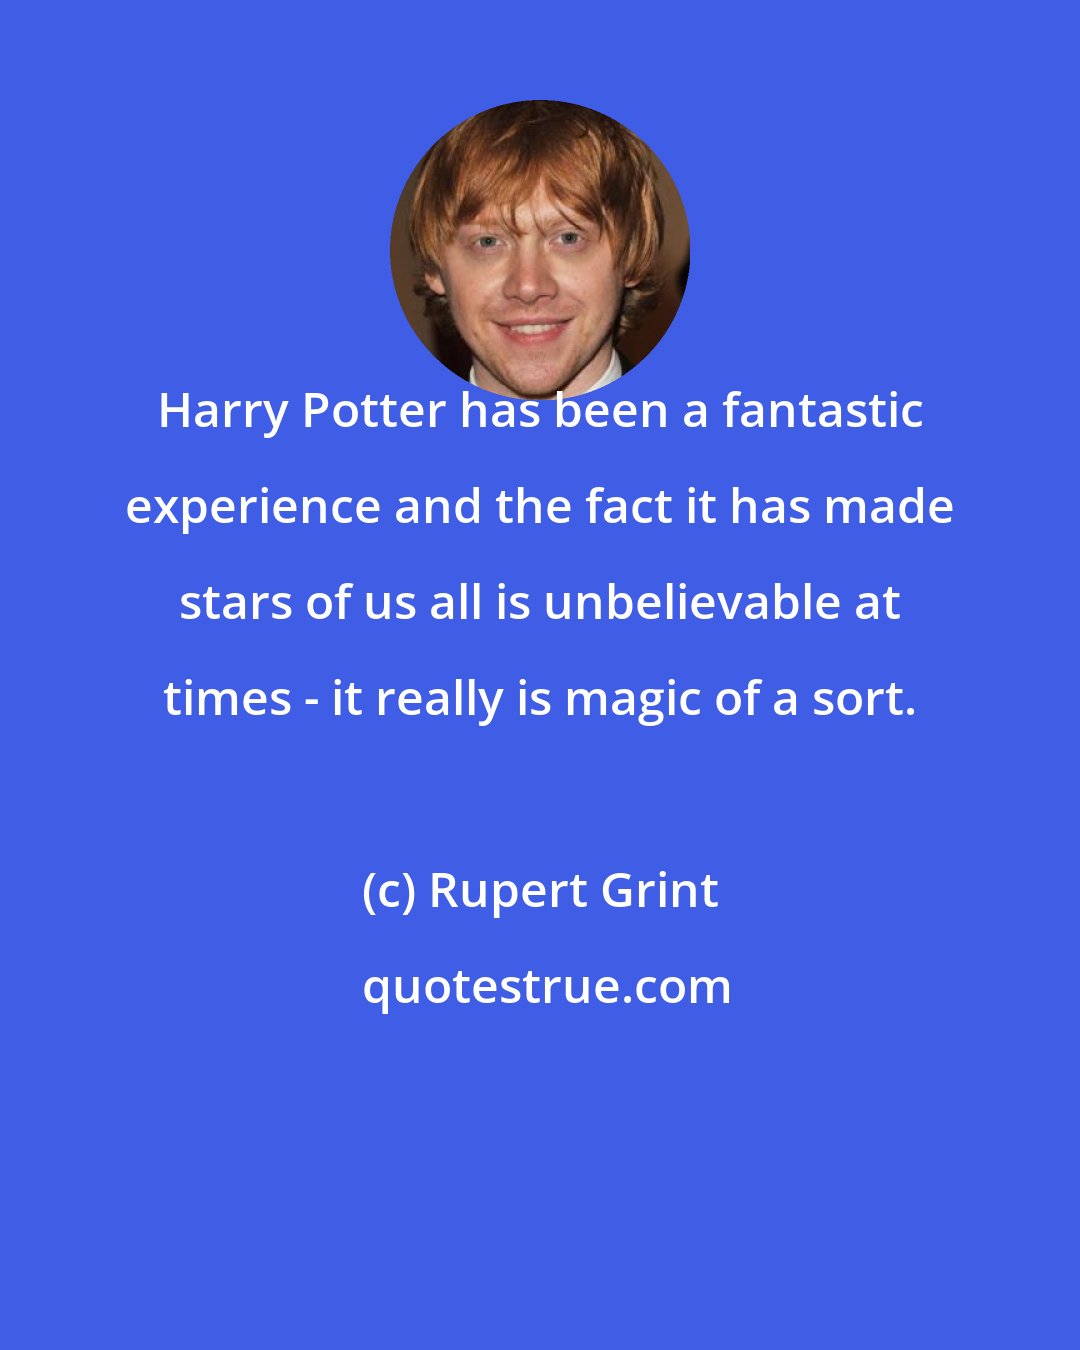 Rupert Grint: Harry Potter has been a fantastic experience and the fact it has made stars of us all is unbelievable at times - it really is magic of a sort.